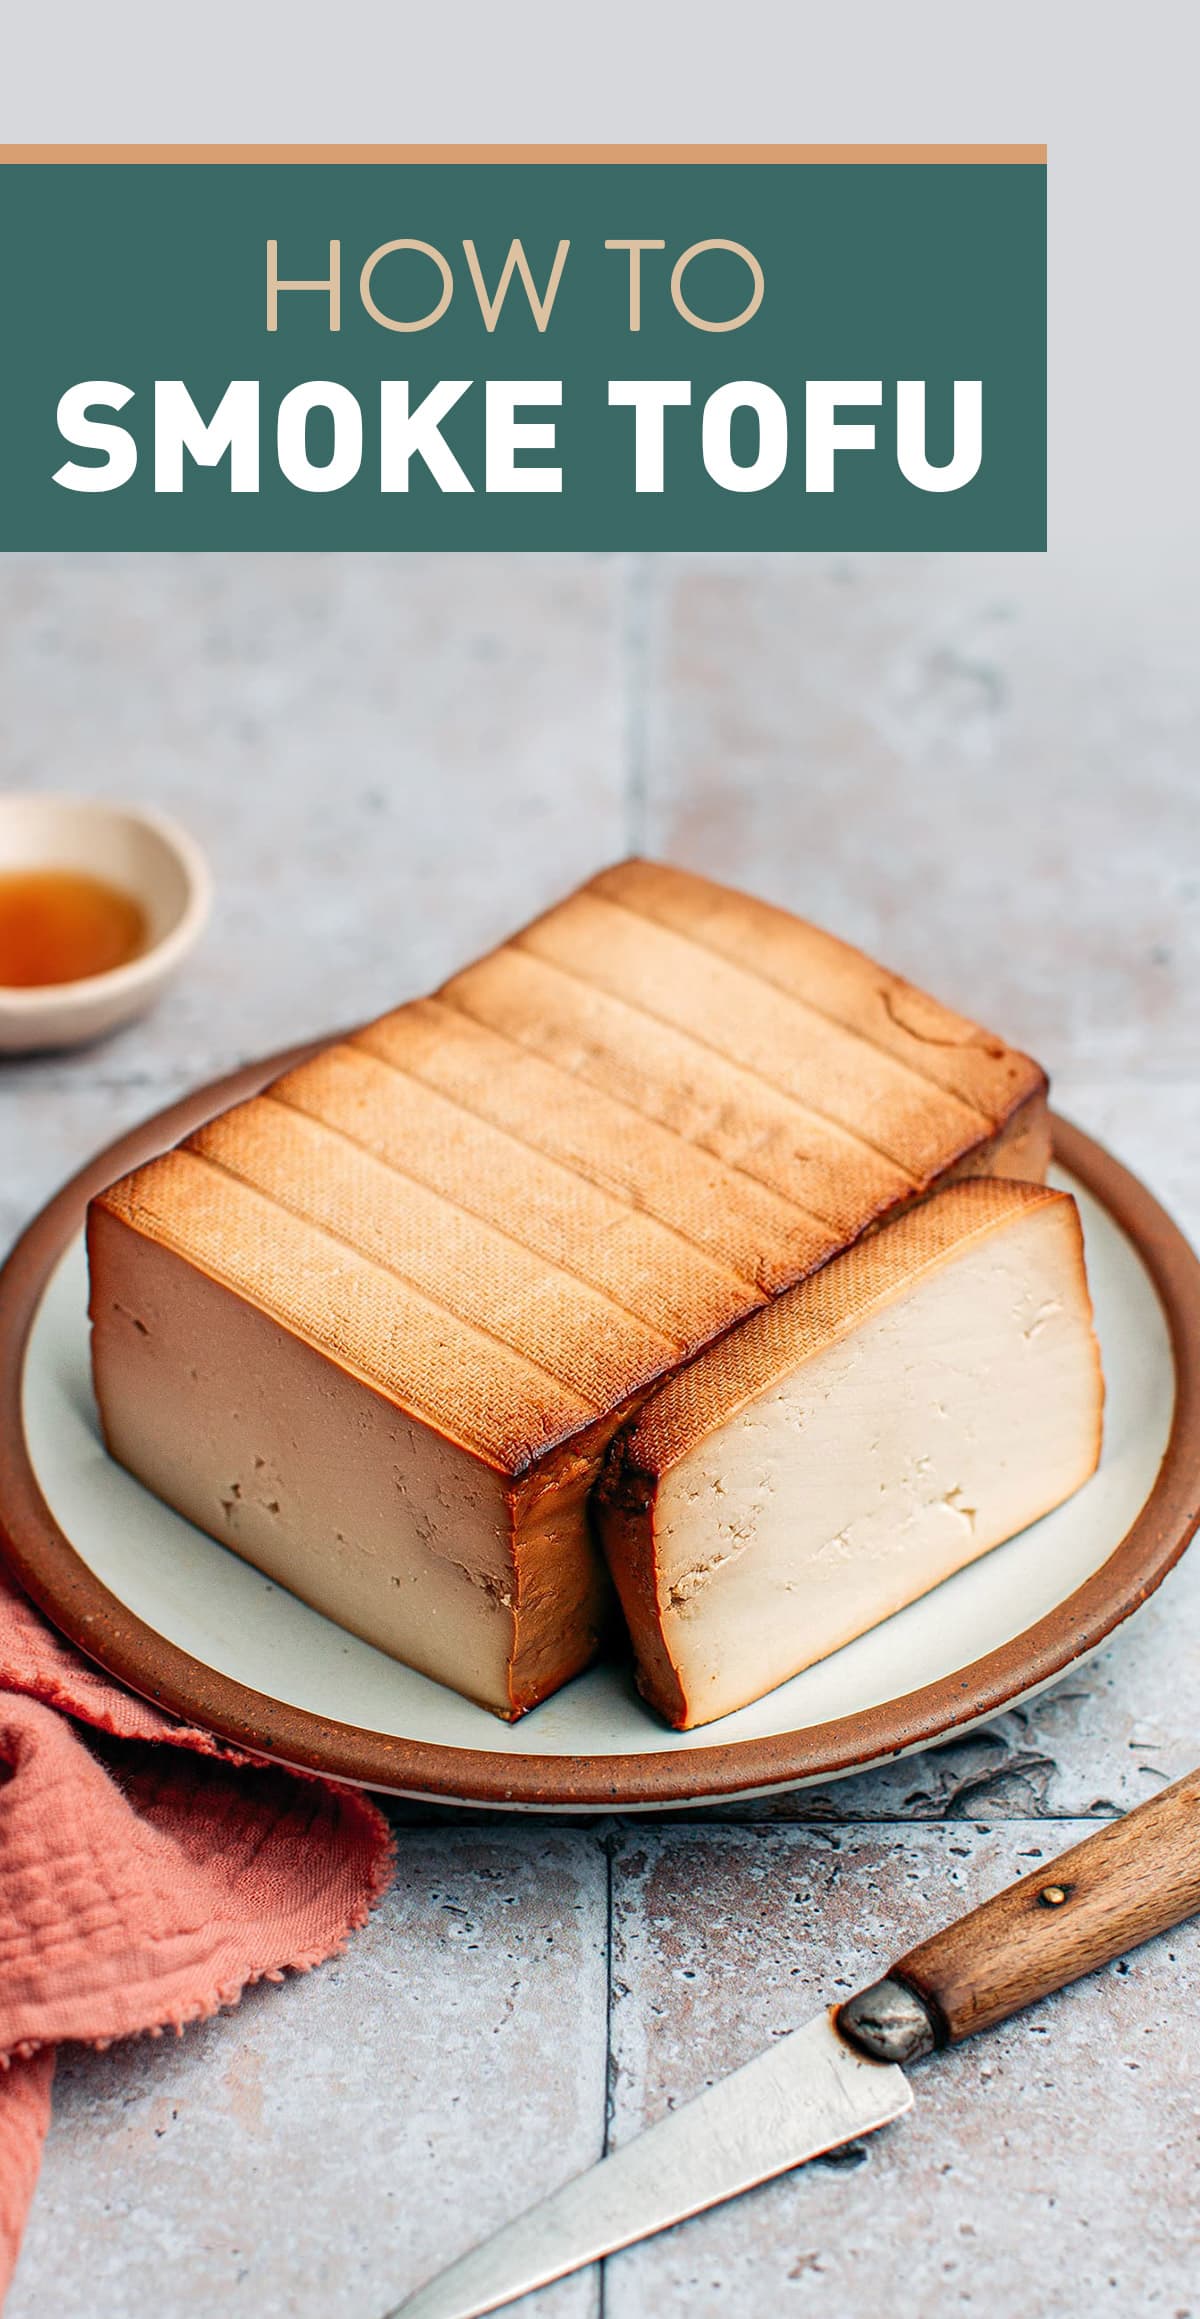 Learn how to smoke tofu in a stovetop smoker! Slowly smoked over hickory wood chips, this tofu has warming and woodsy notes and packs a ton of umami. Use it in curries, sandwiches, salads, stir-fries, and more! #smoked #tofu